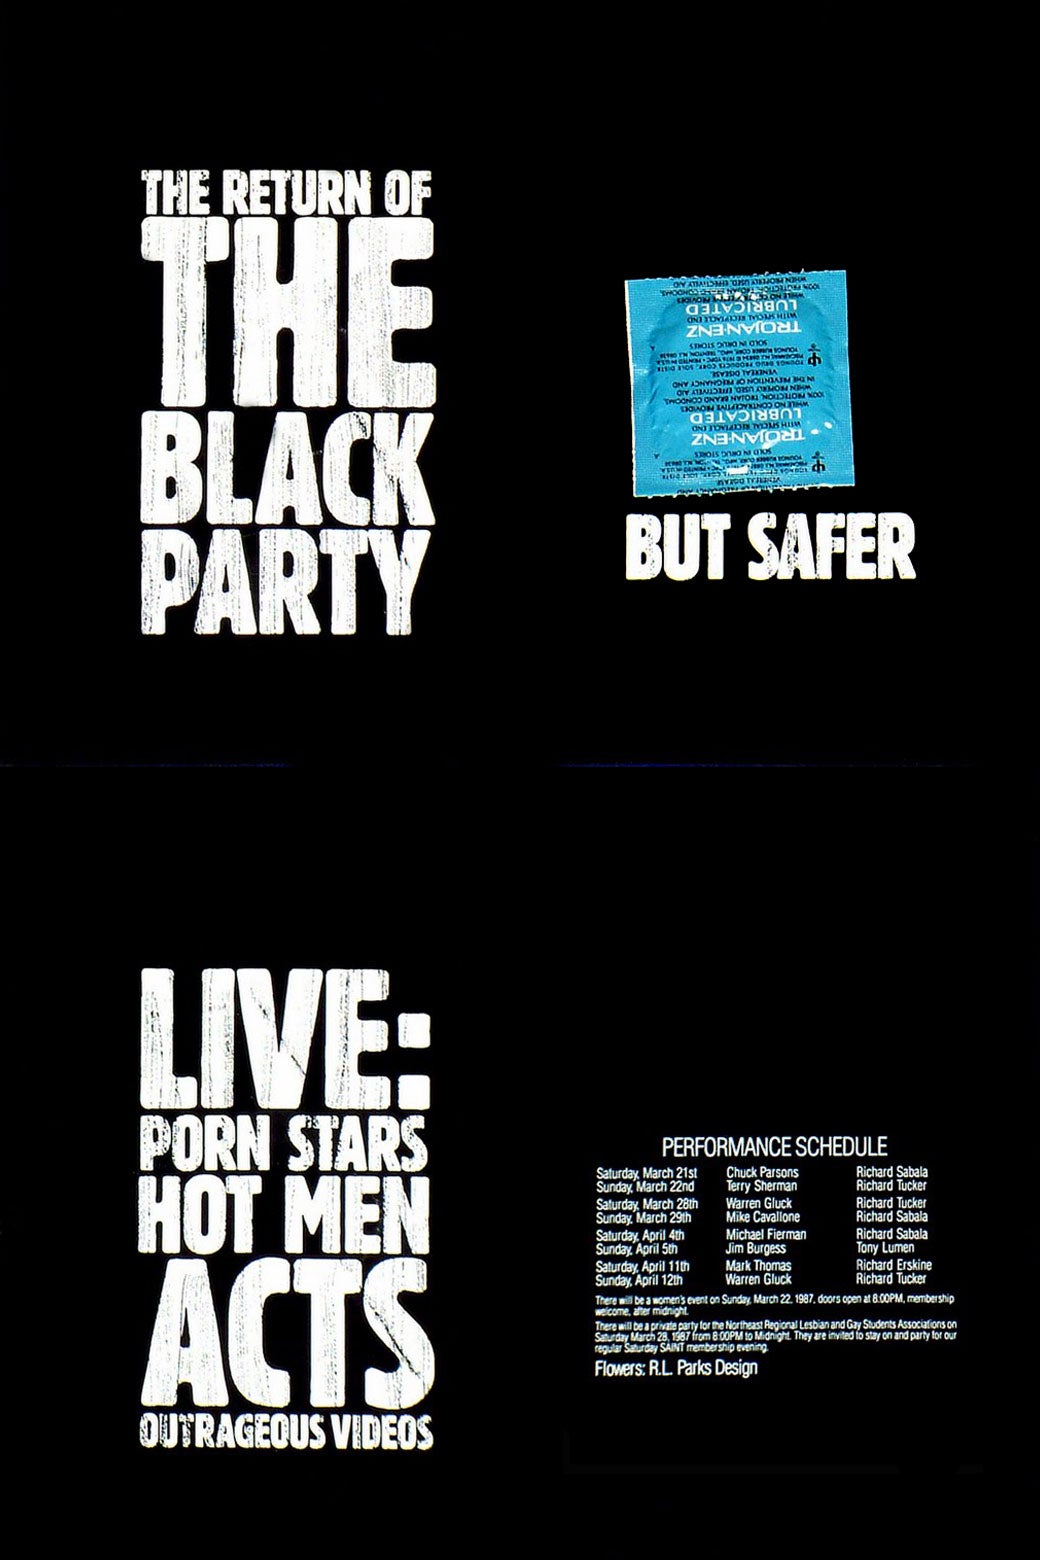 Flyer reads "THE RETURN OF THE BLACK PARTY" and "BUT SAFER" with an image of a condom.